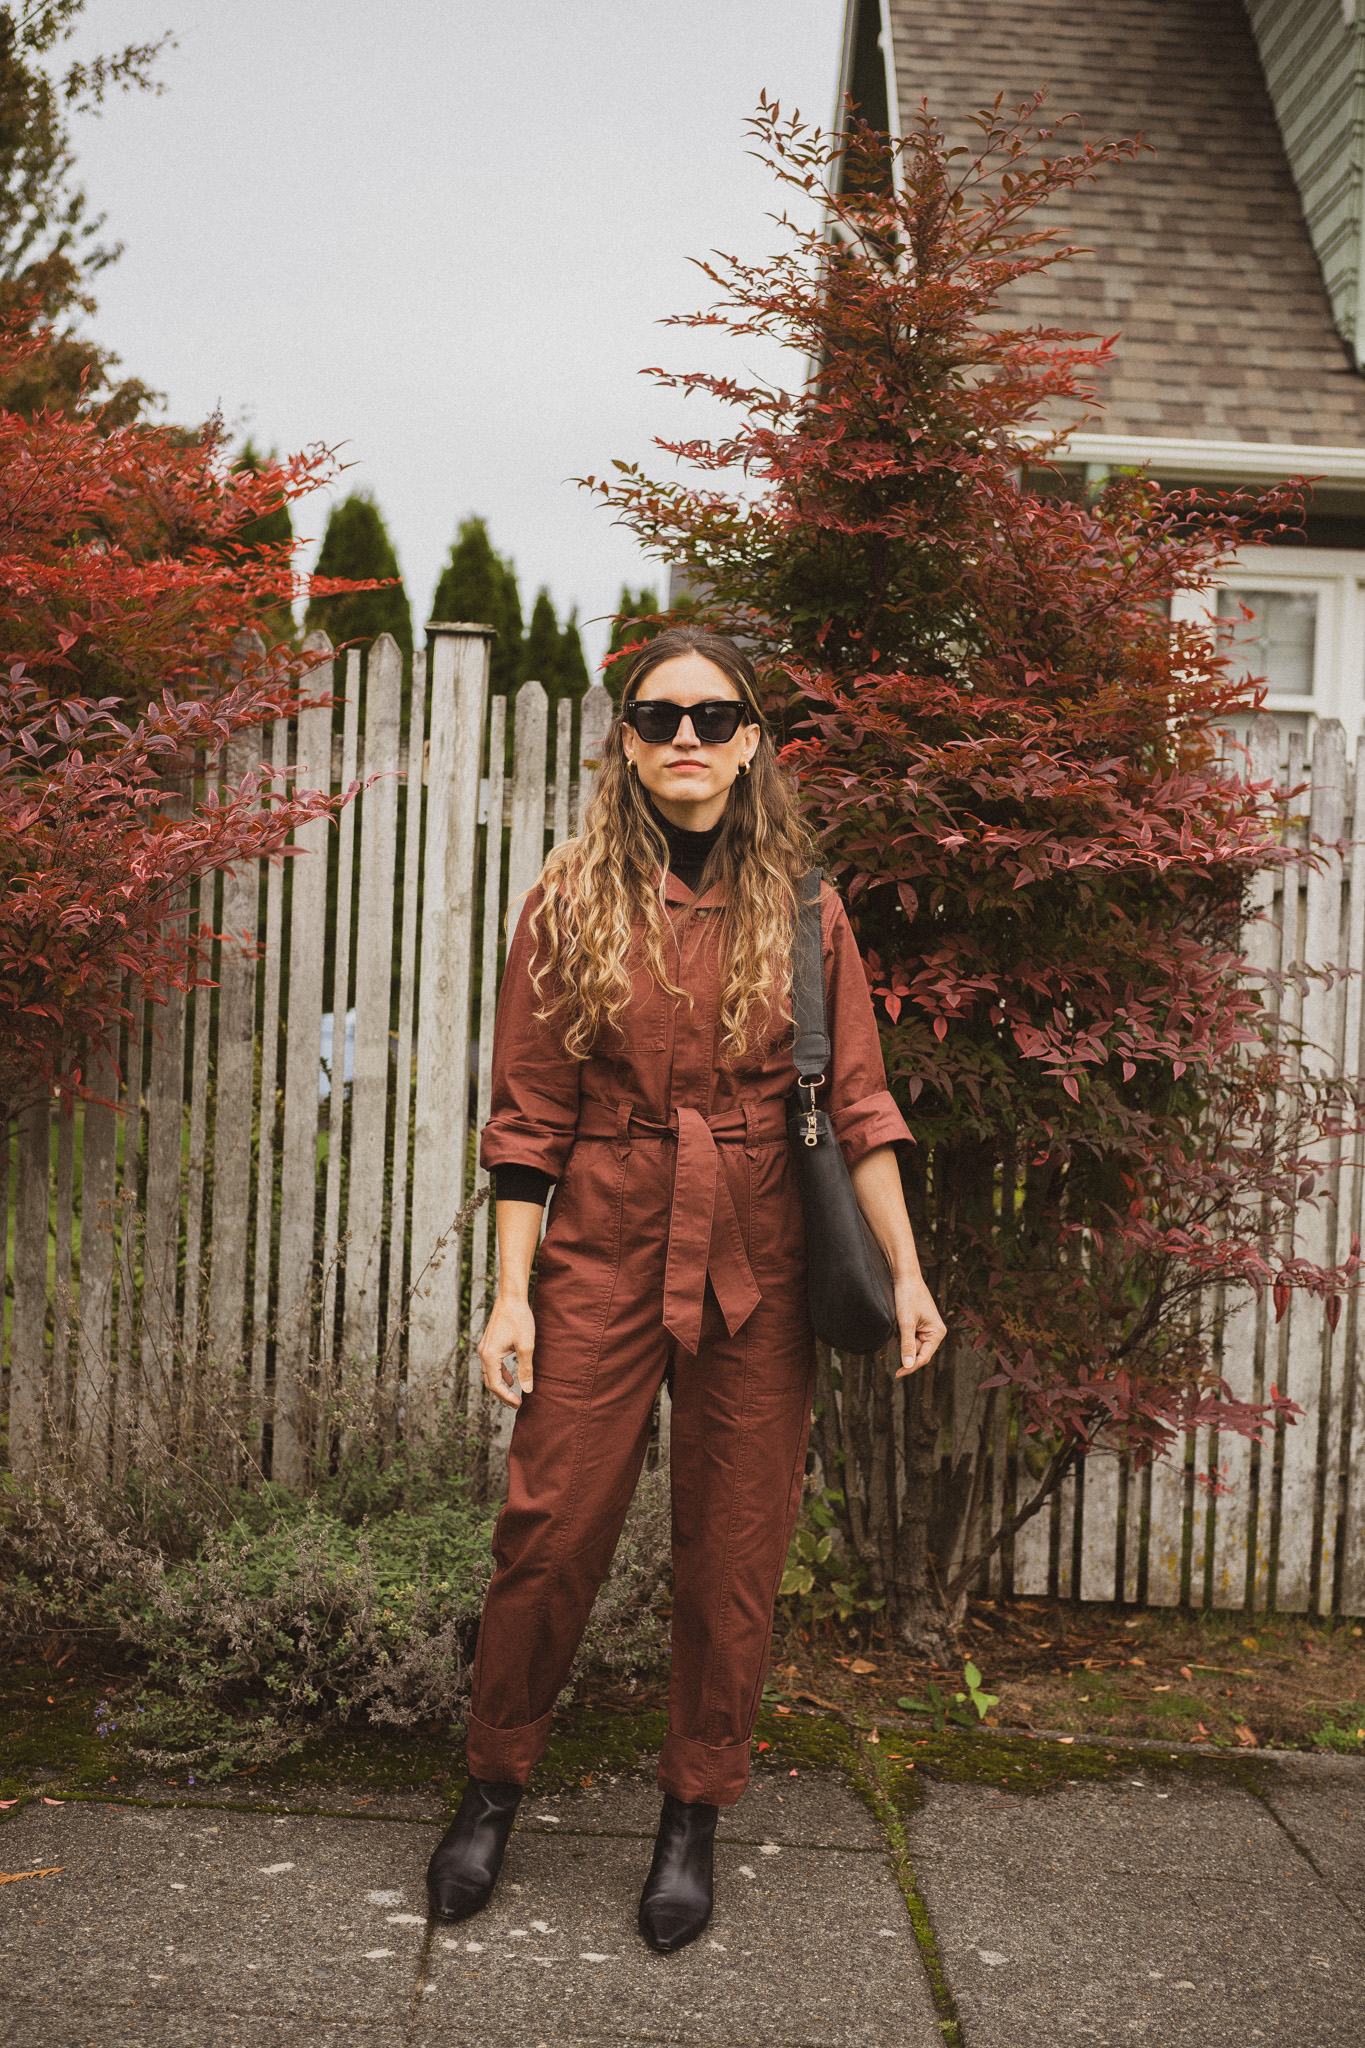 How To Style A Jumpsuit For Fall - Stitch & Salt